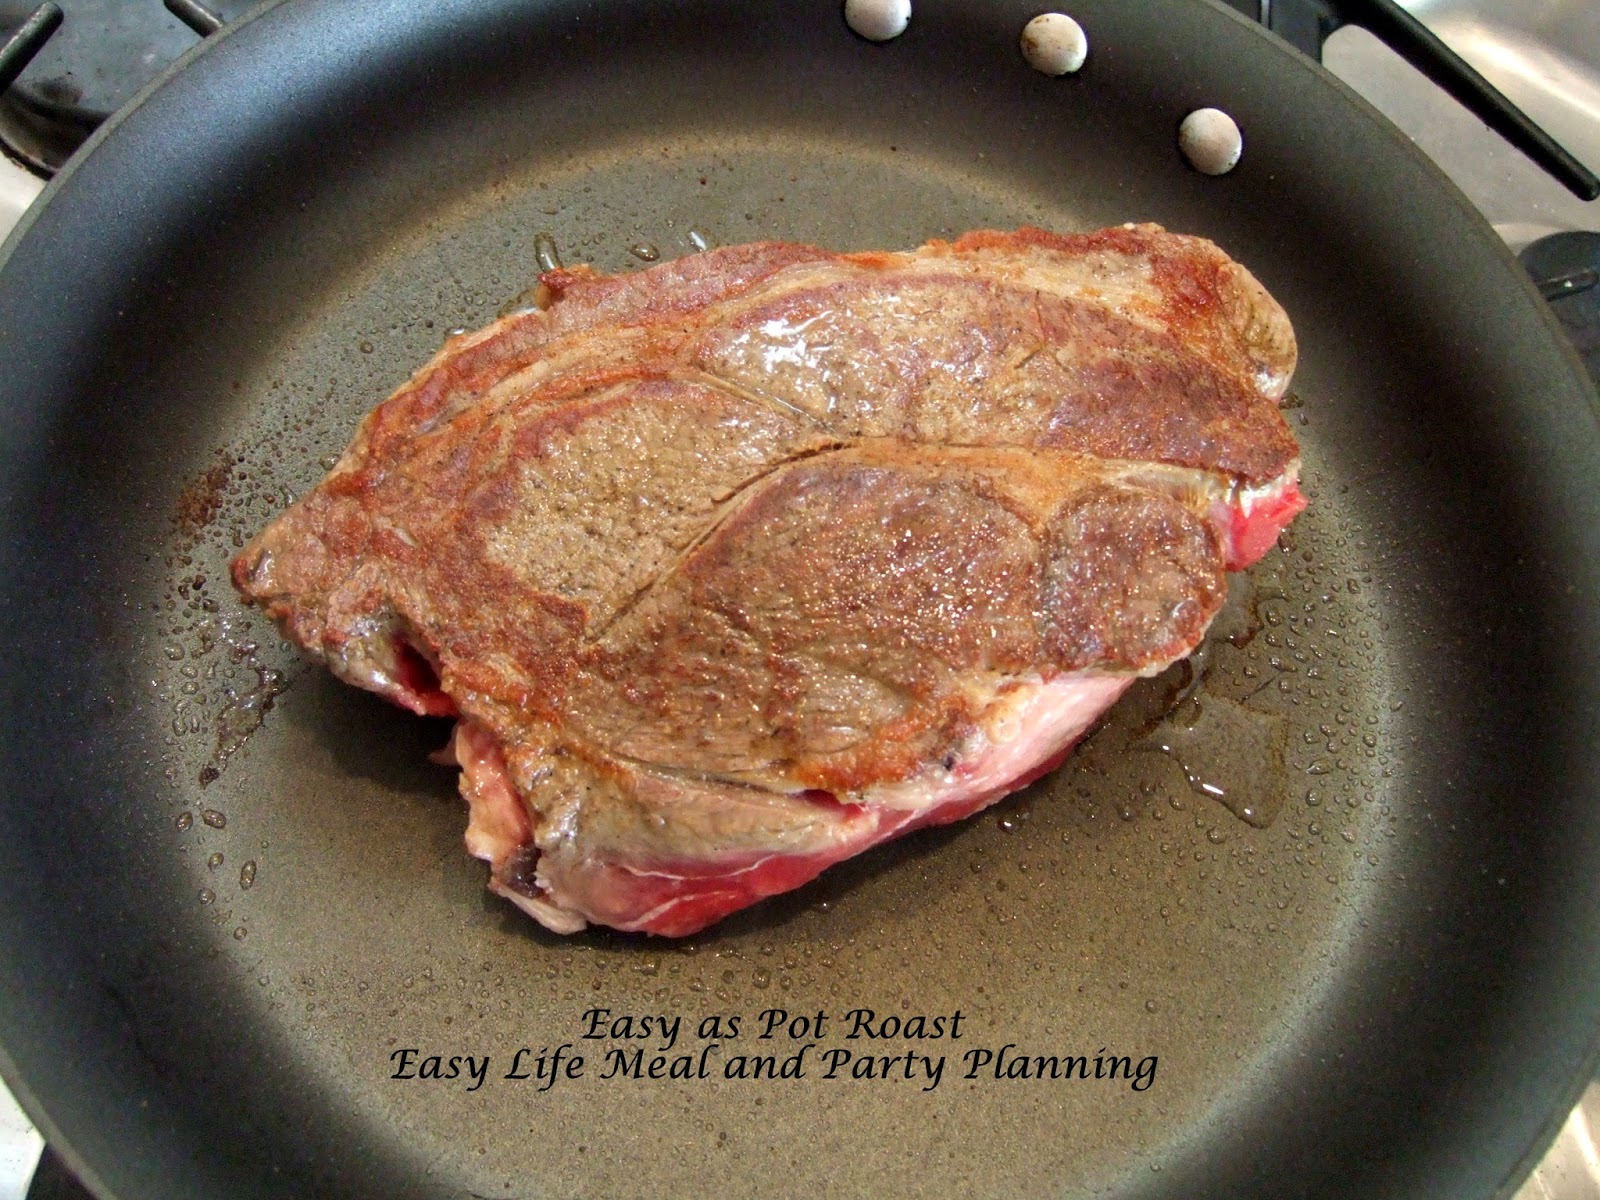 Easy as Pot Roast by Easy Life Meal and Party Planning